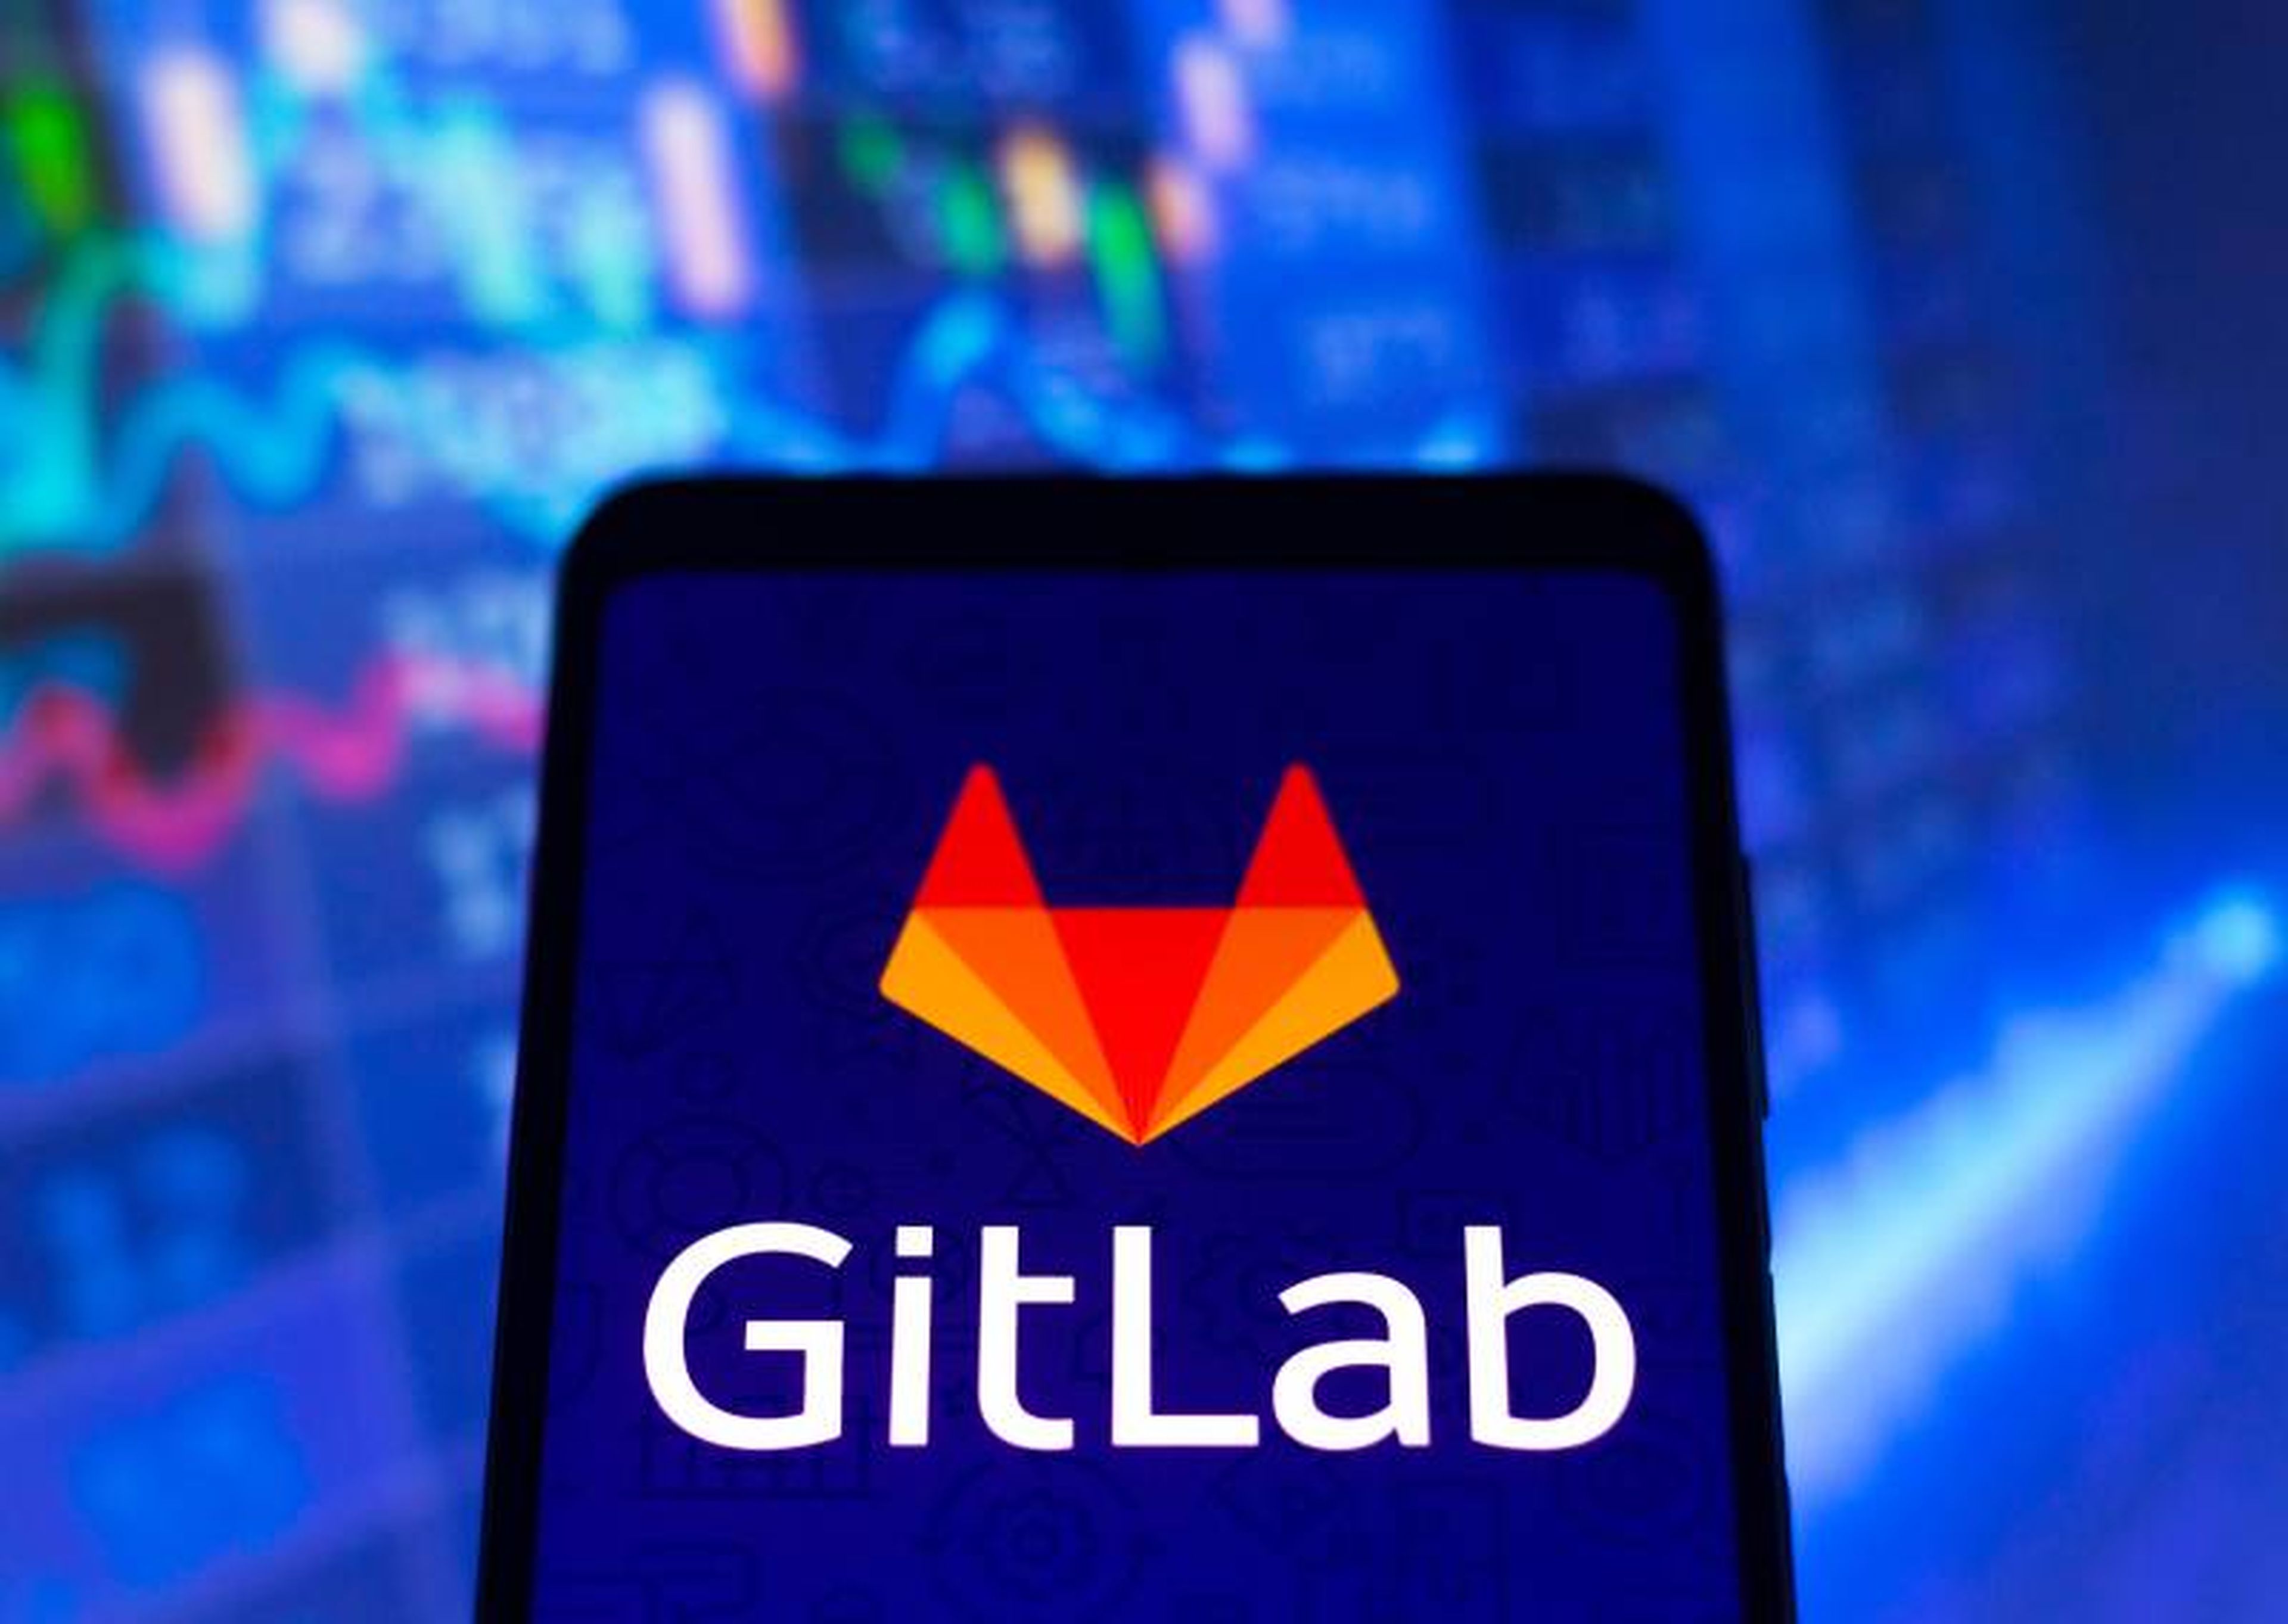 In this photo illustration, the GitLab logo seen displayed on a smartphone screen.